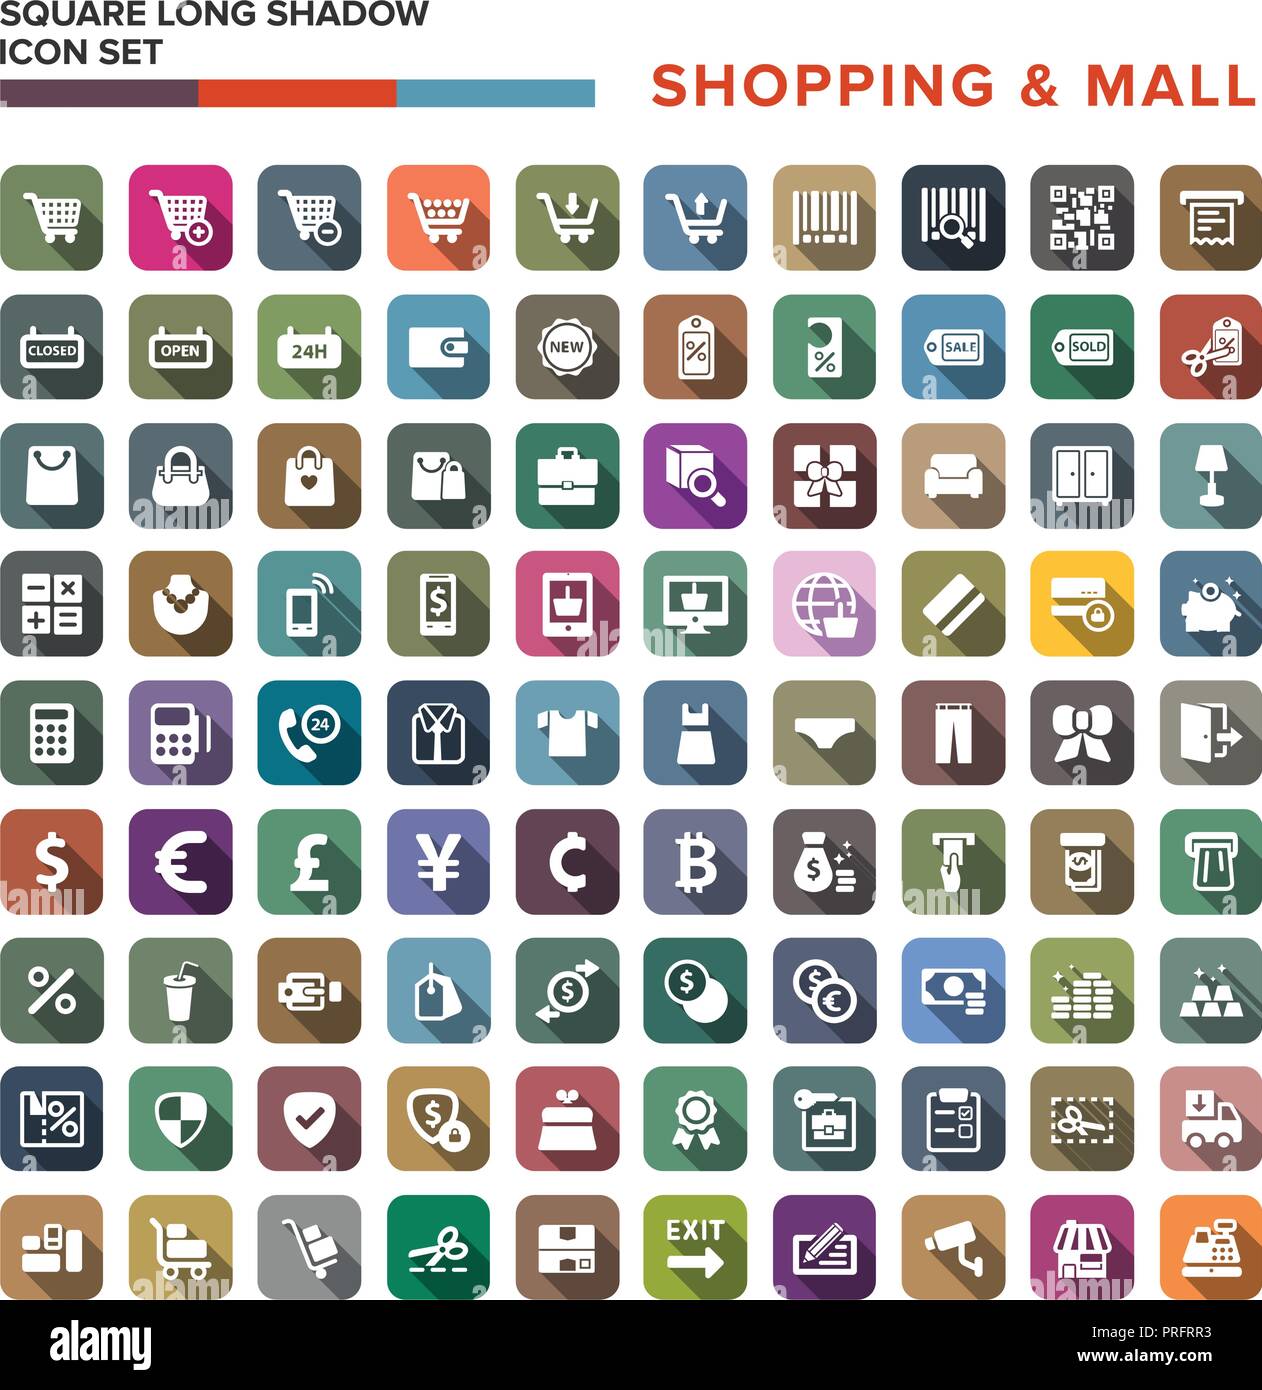 Shopping Mall icons set with long shadow isolated, vector illustration Stock Vector